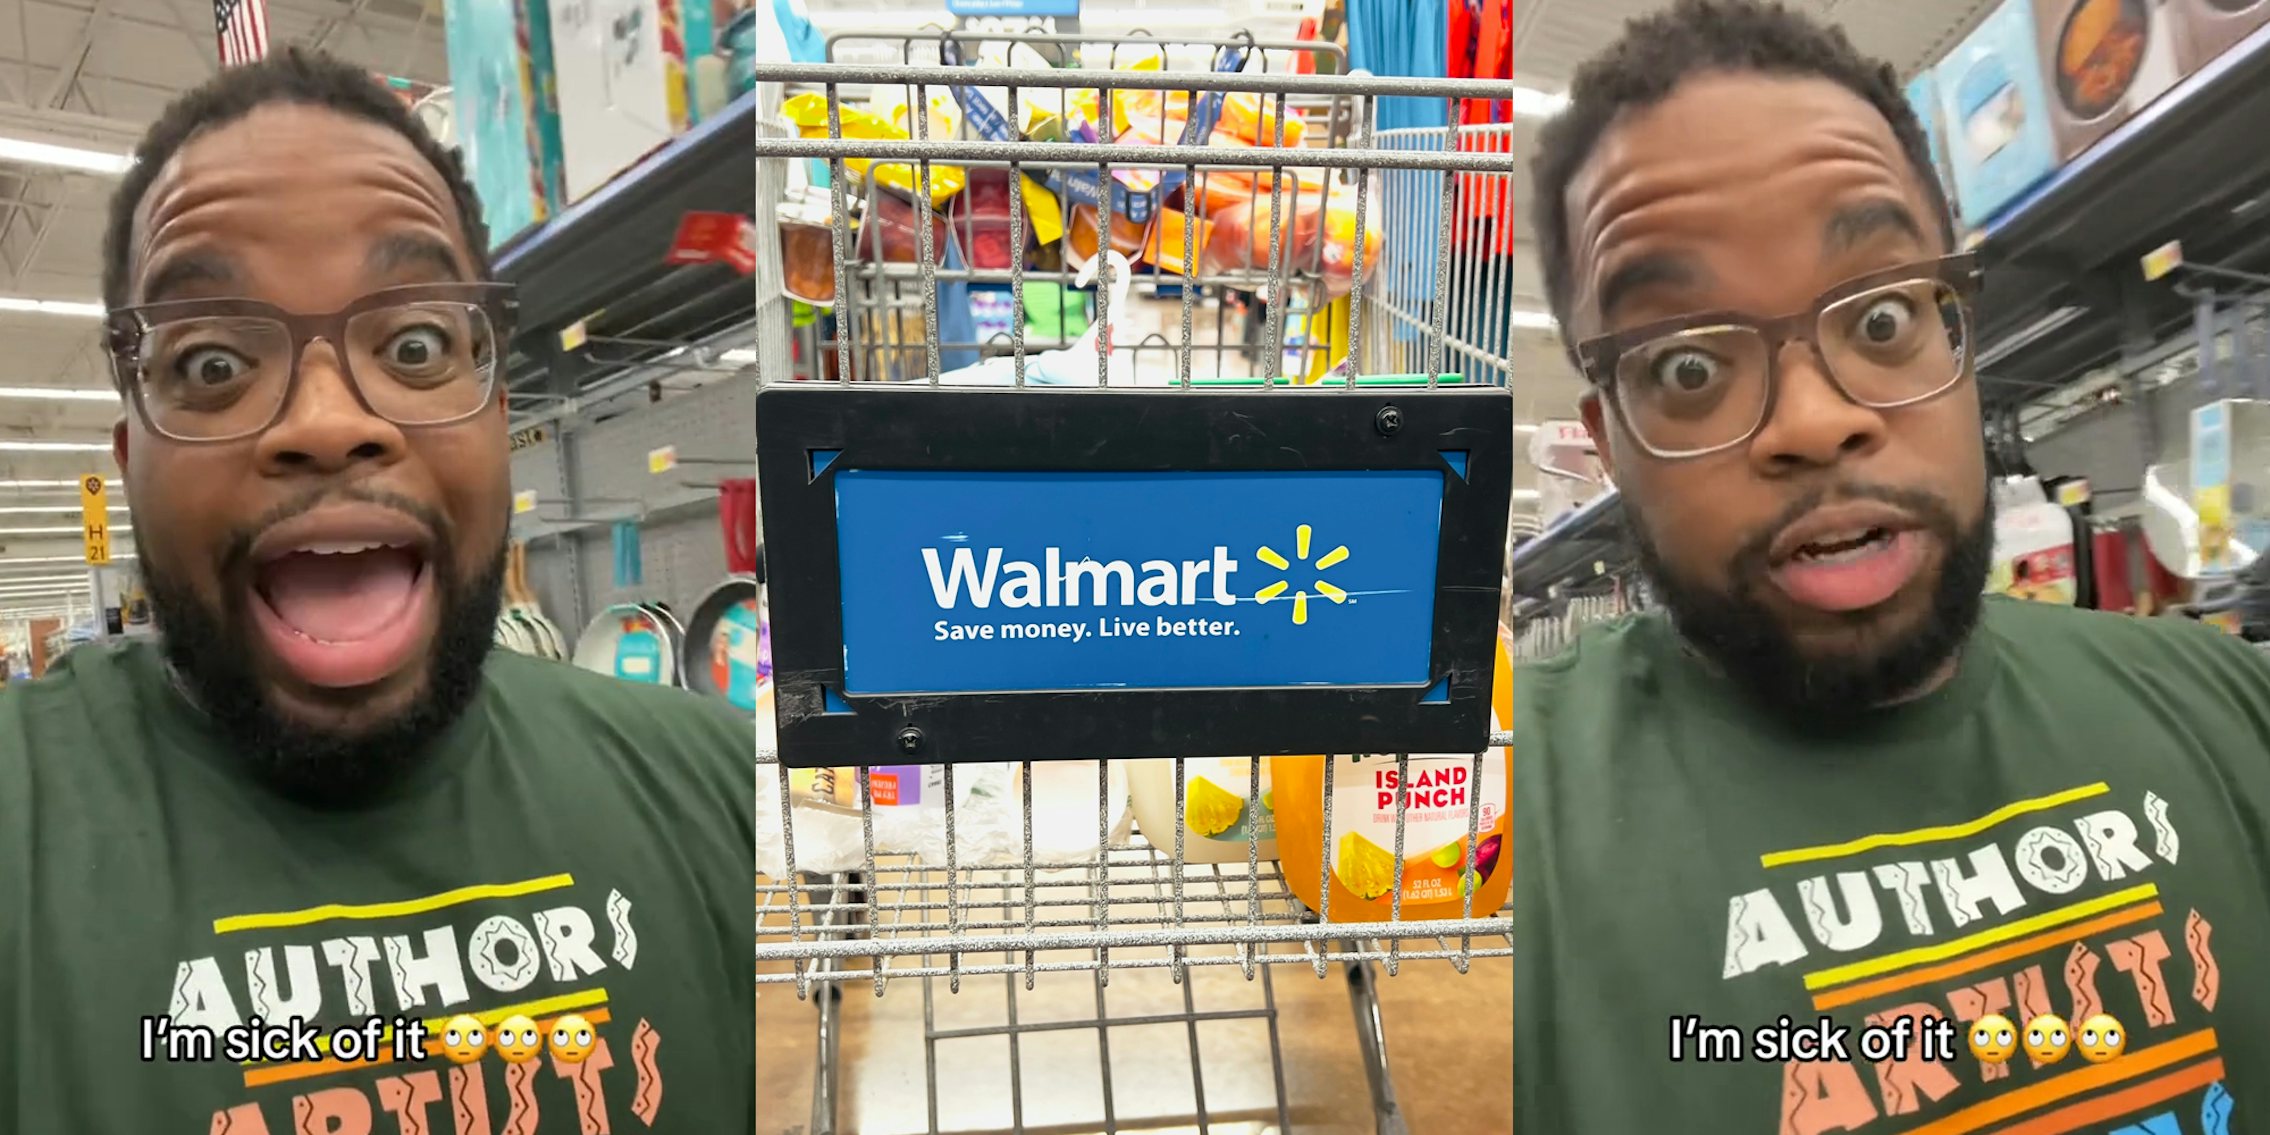 Walmart shopper speaking with caption 'I'm sick of it' (l) Walmart cart in aisle with logo (c) Walmart shopper speaking with caption 'I'm sick of it' (r)